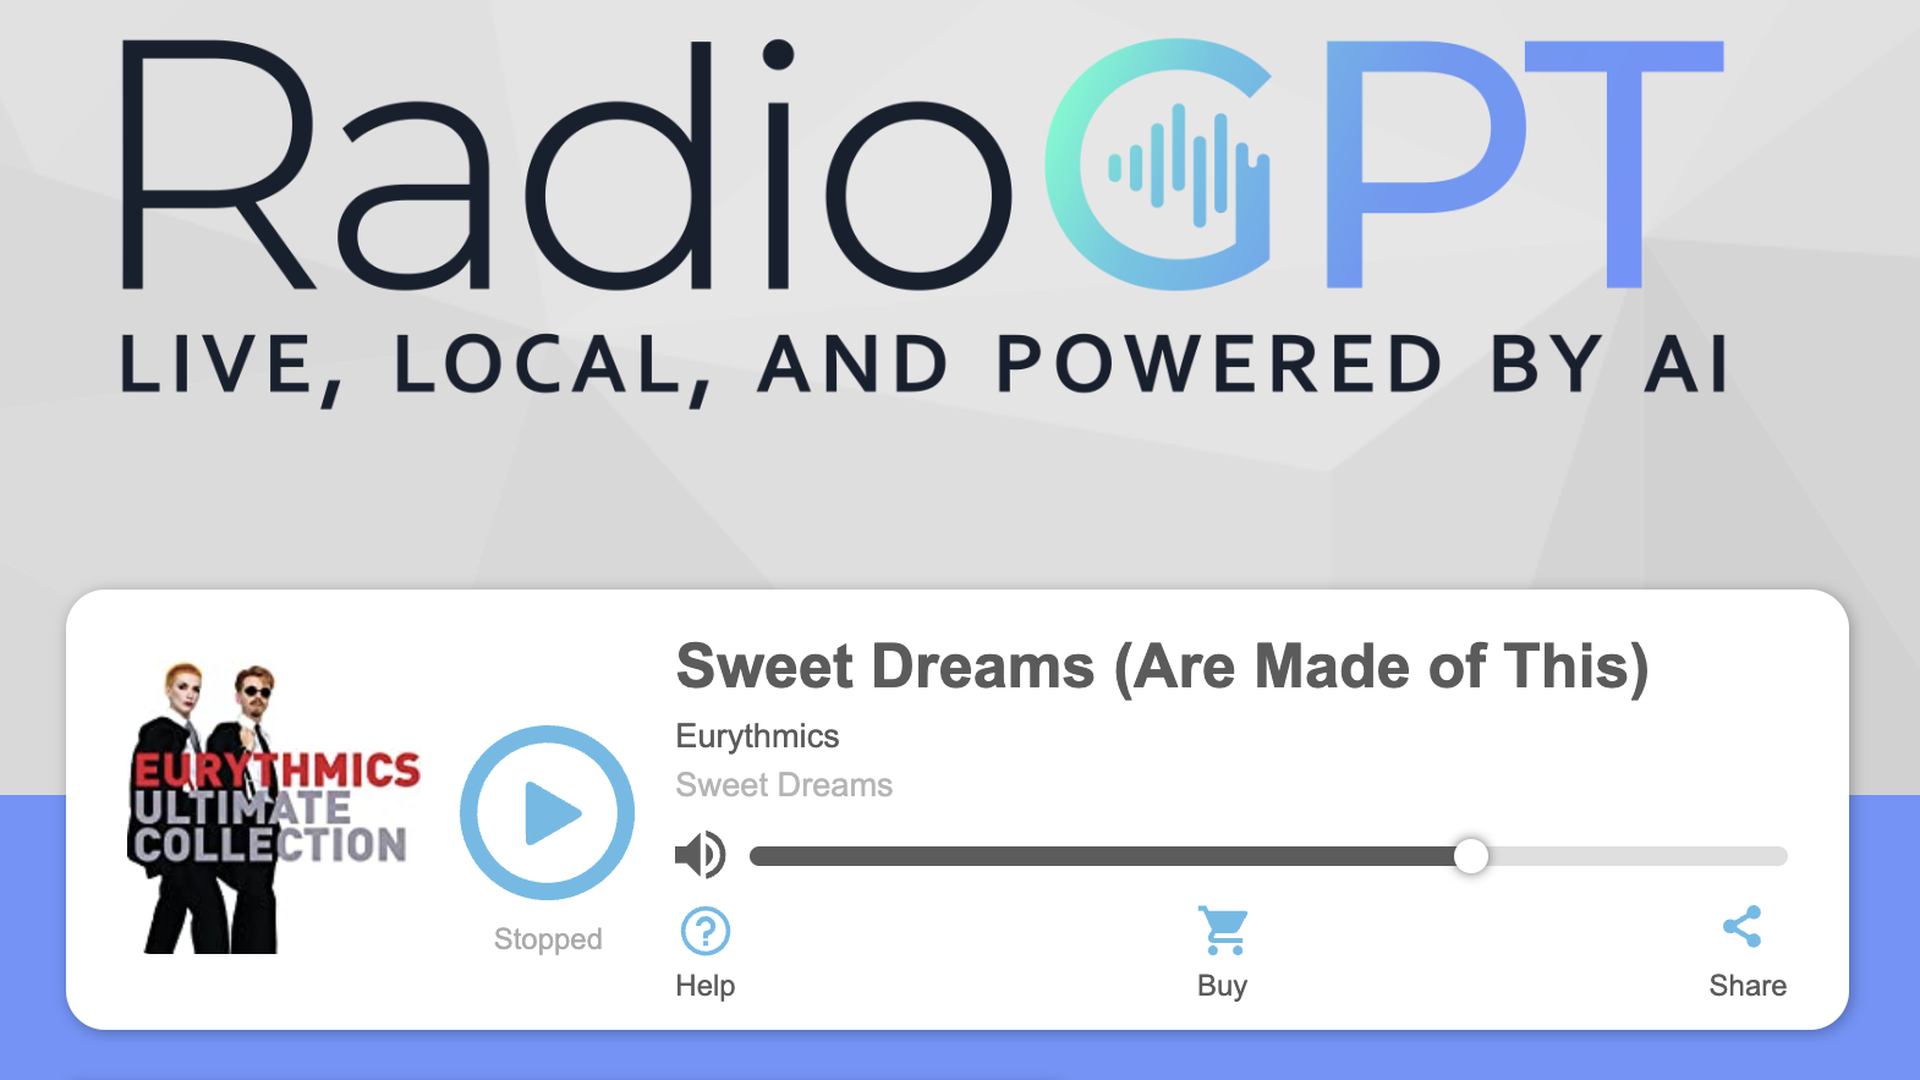 A screen grab of RadioGPT, and online station with an image of Eurythmics' "Sweet Dreams" playing.